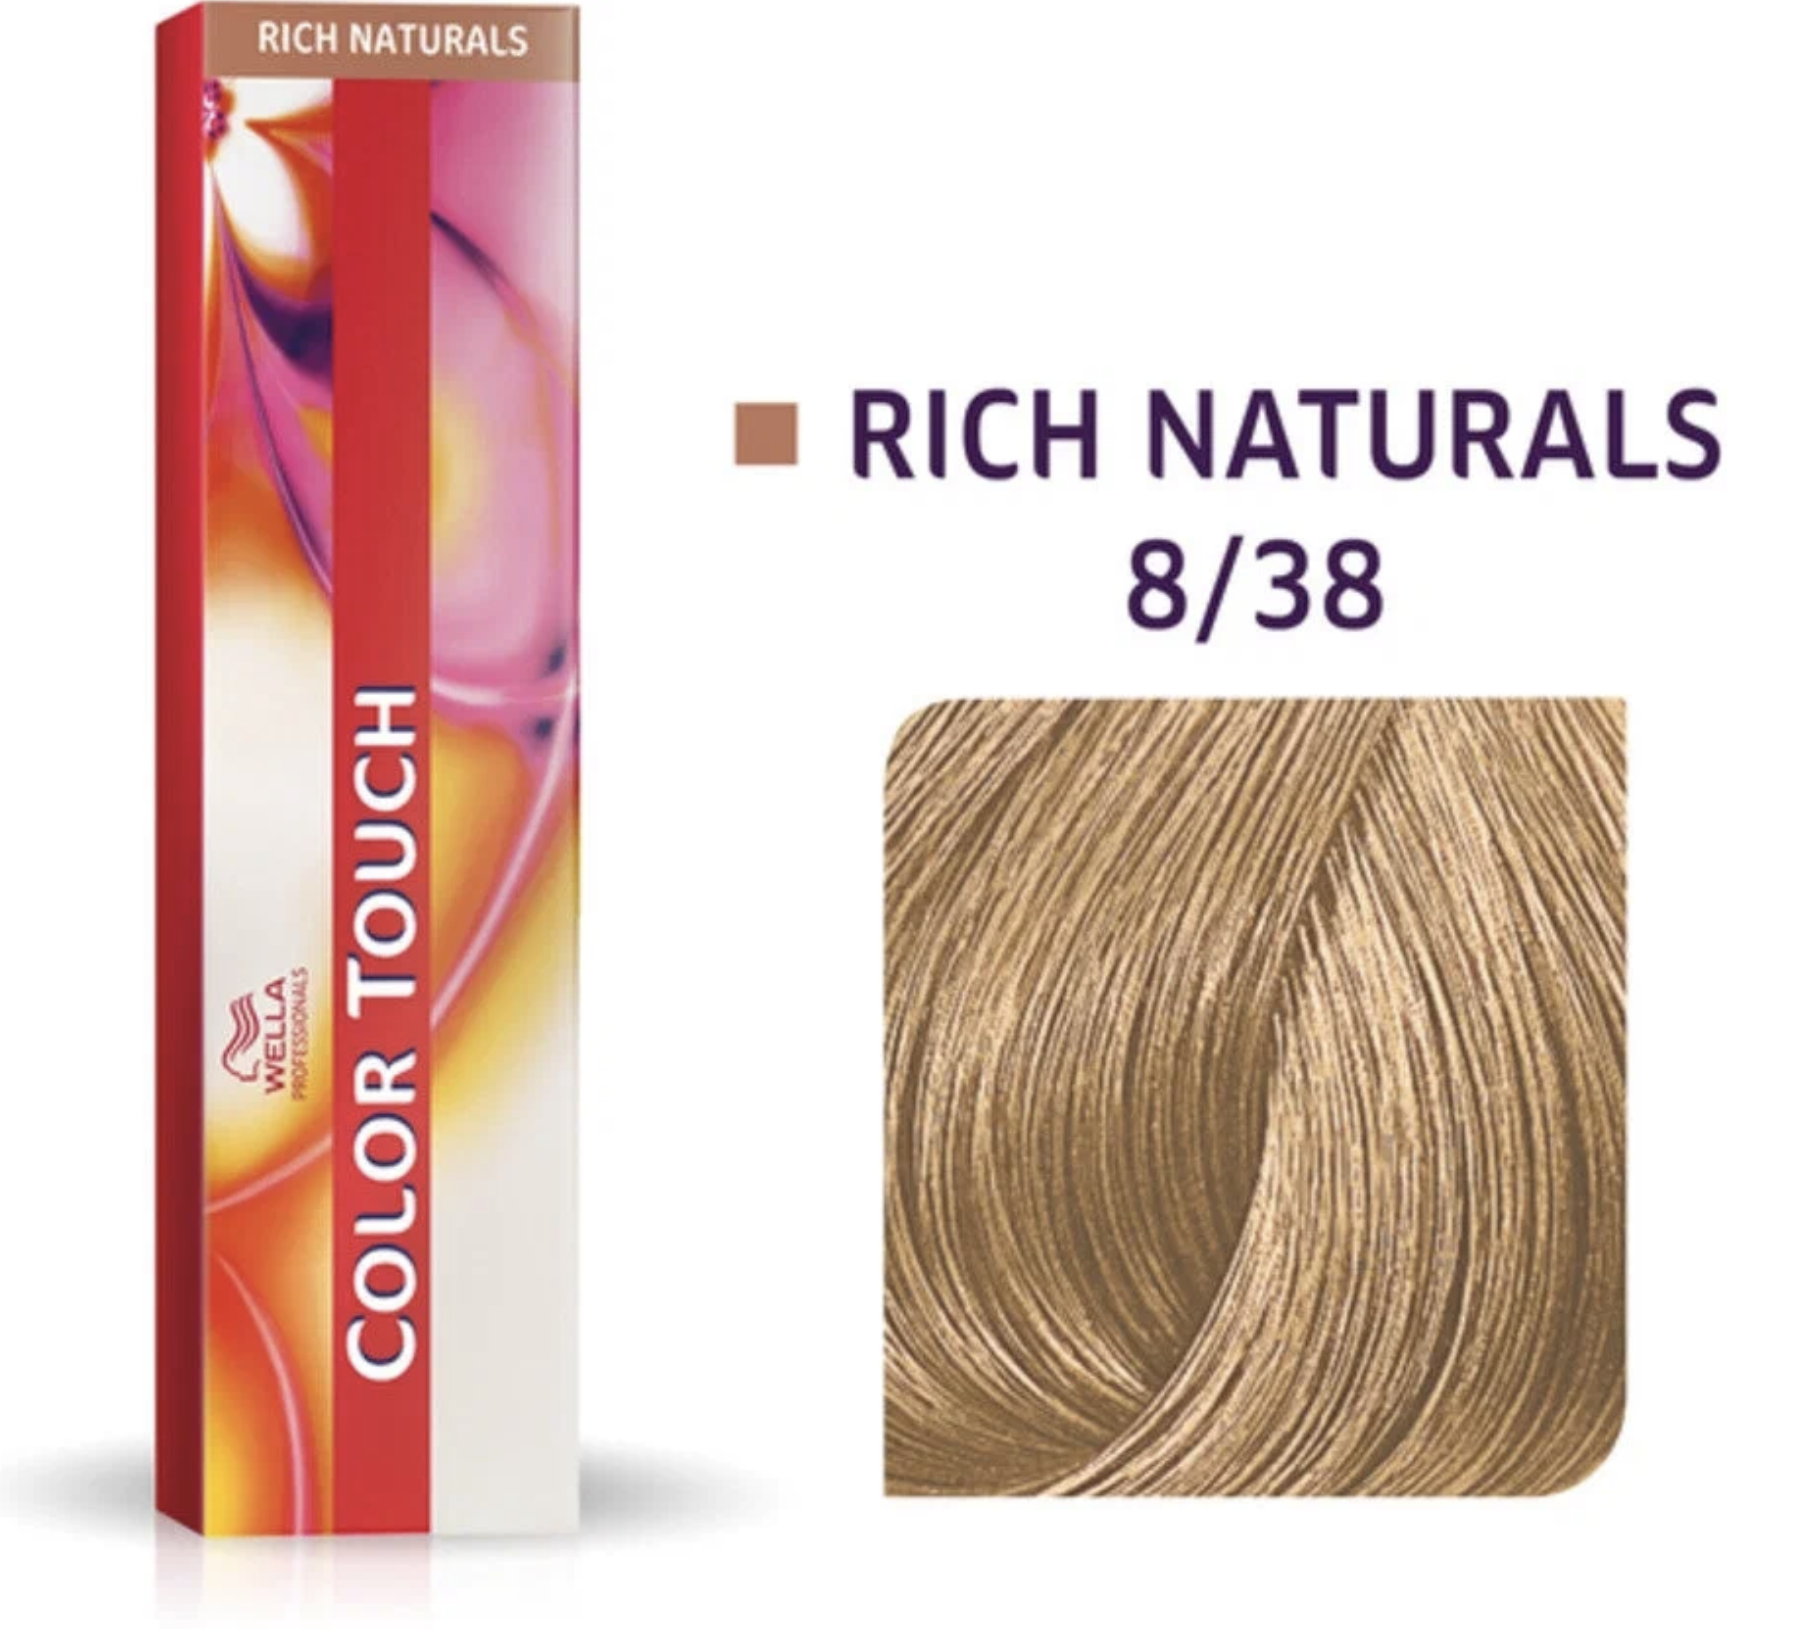   / Wella Color Touch - -    8/38     60 